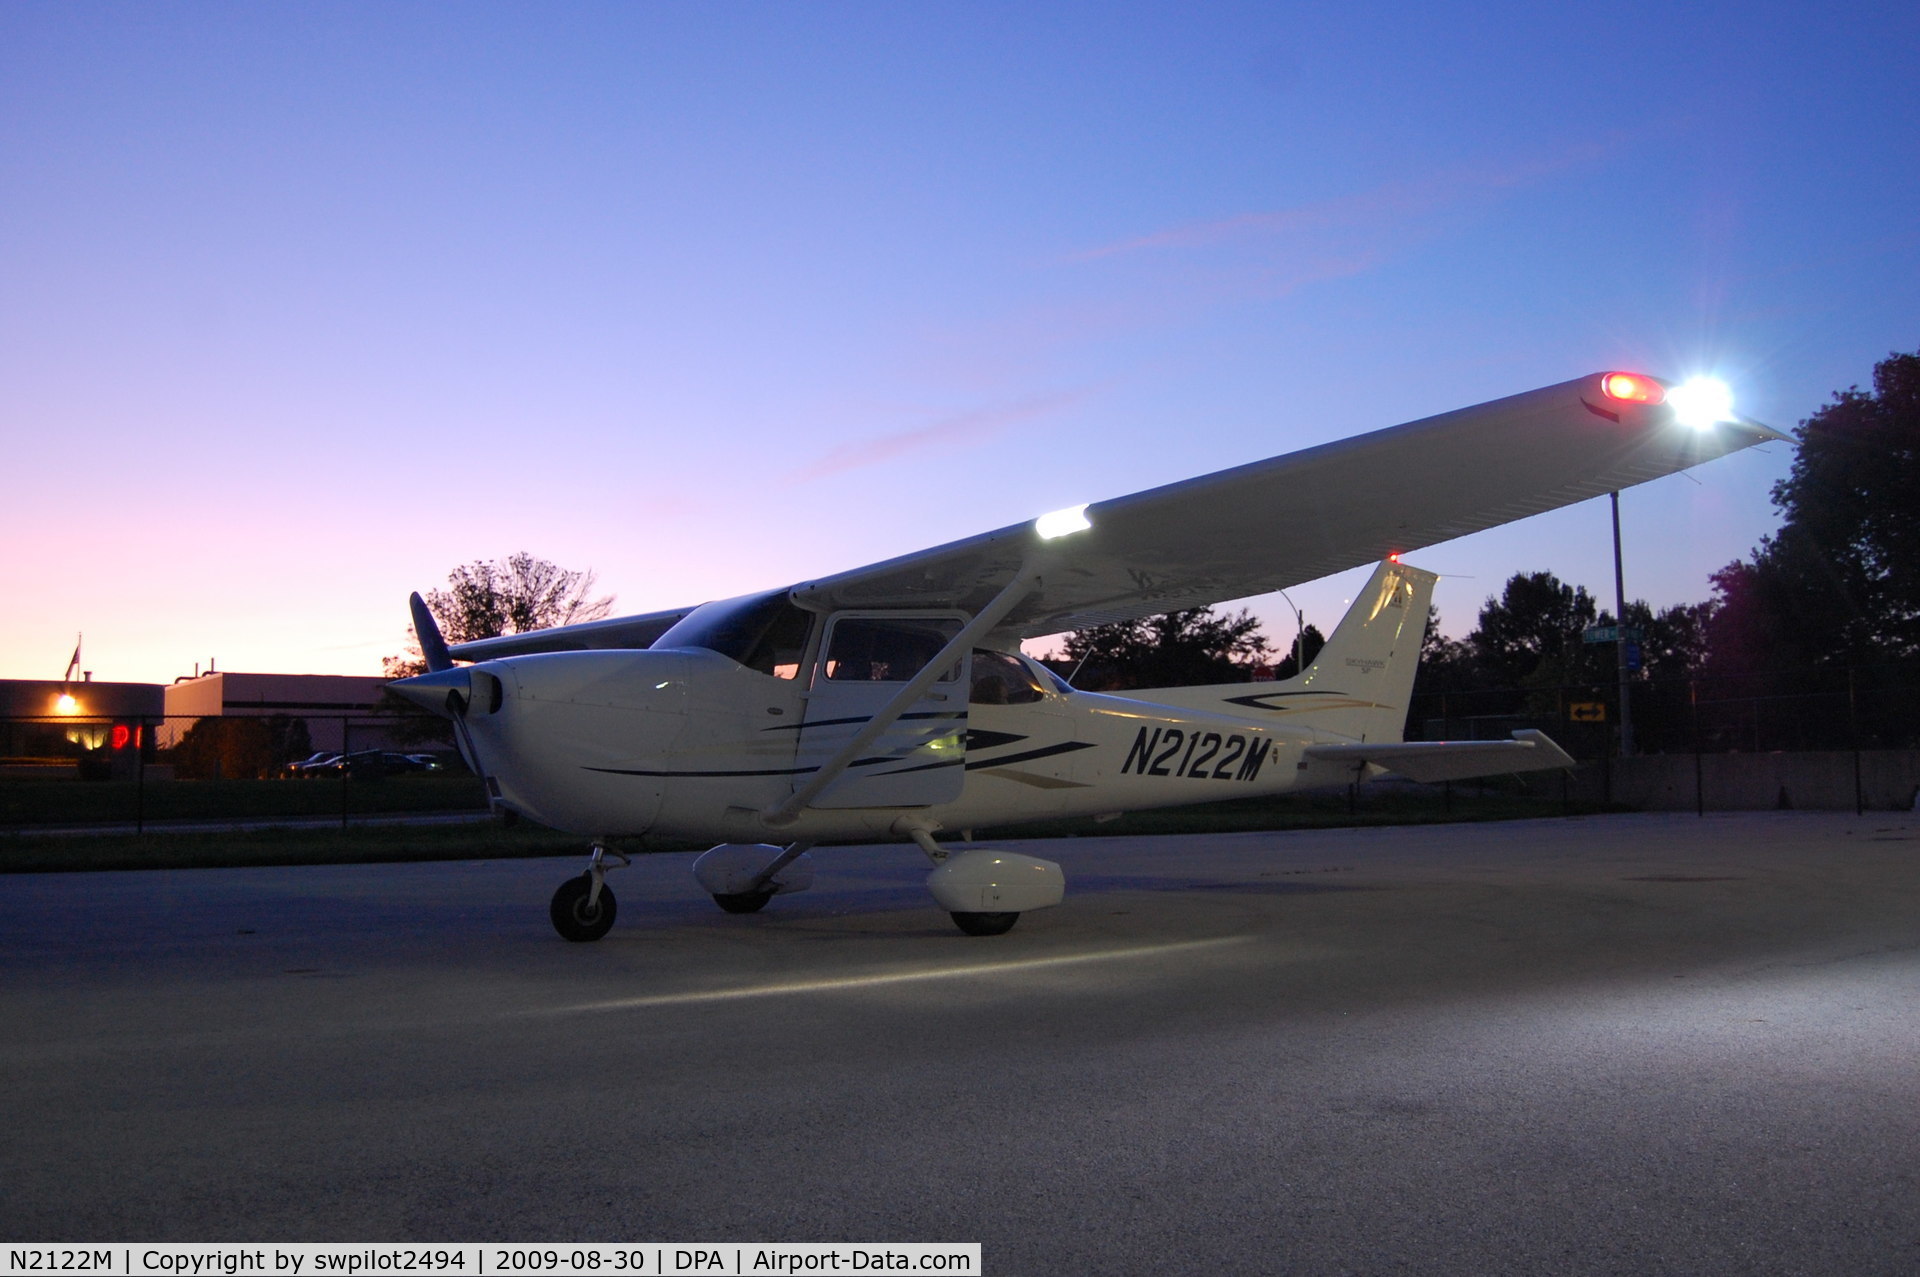 N2122M, 2007 Cessna 172S C/N 172S10442, Credit for photo: Michael Gulley. Great capture of the strobe